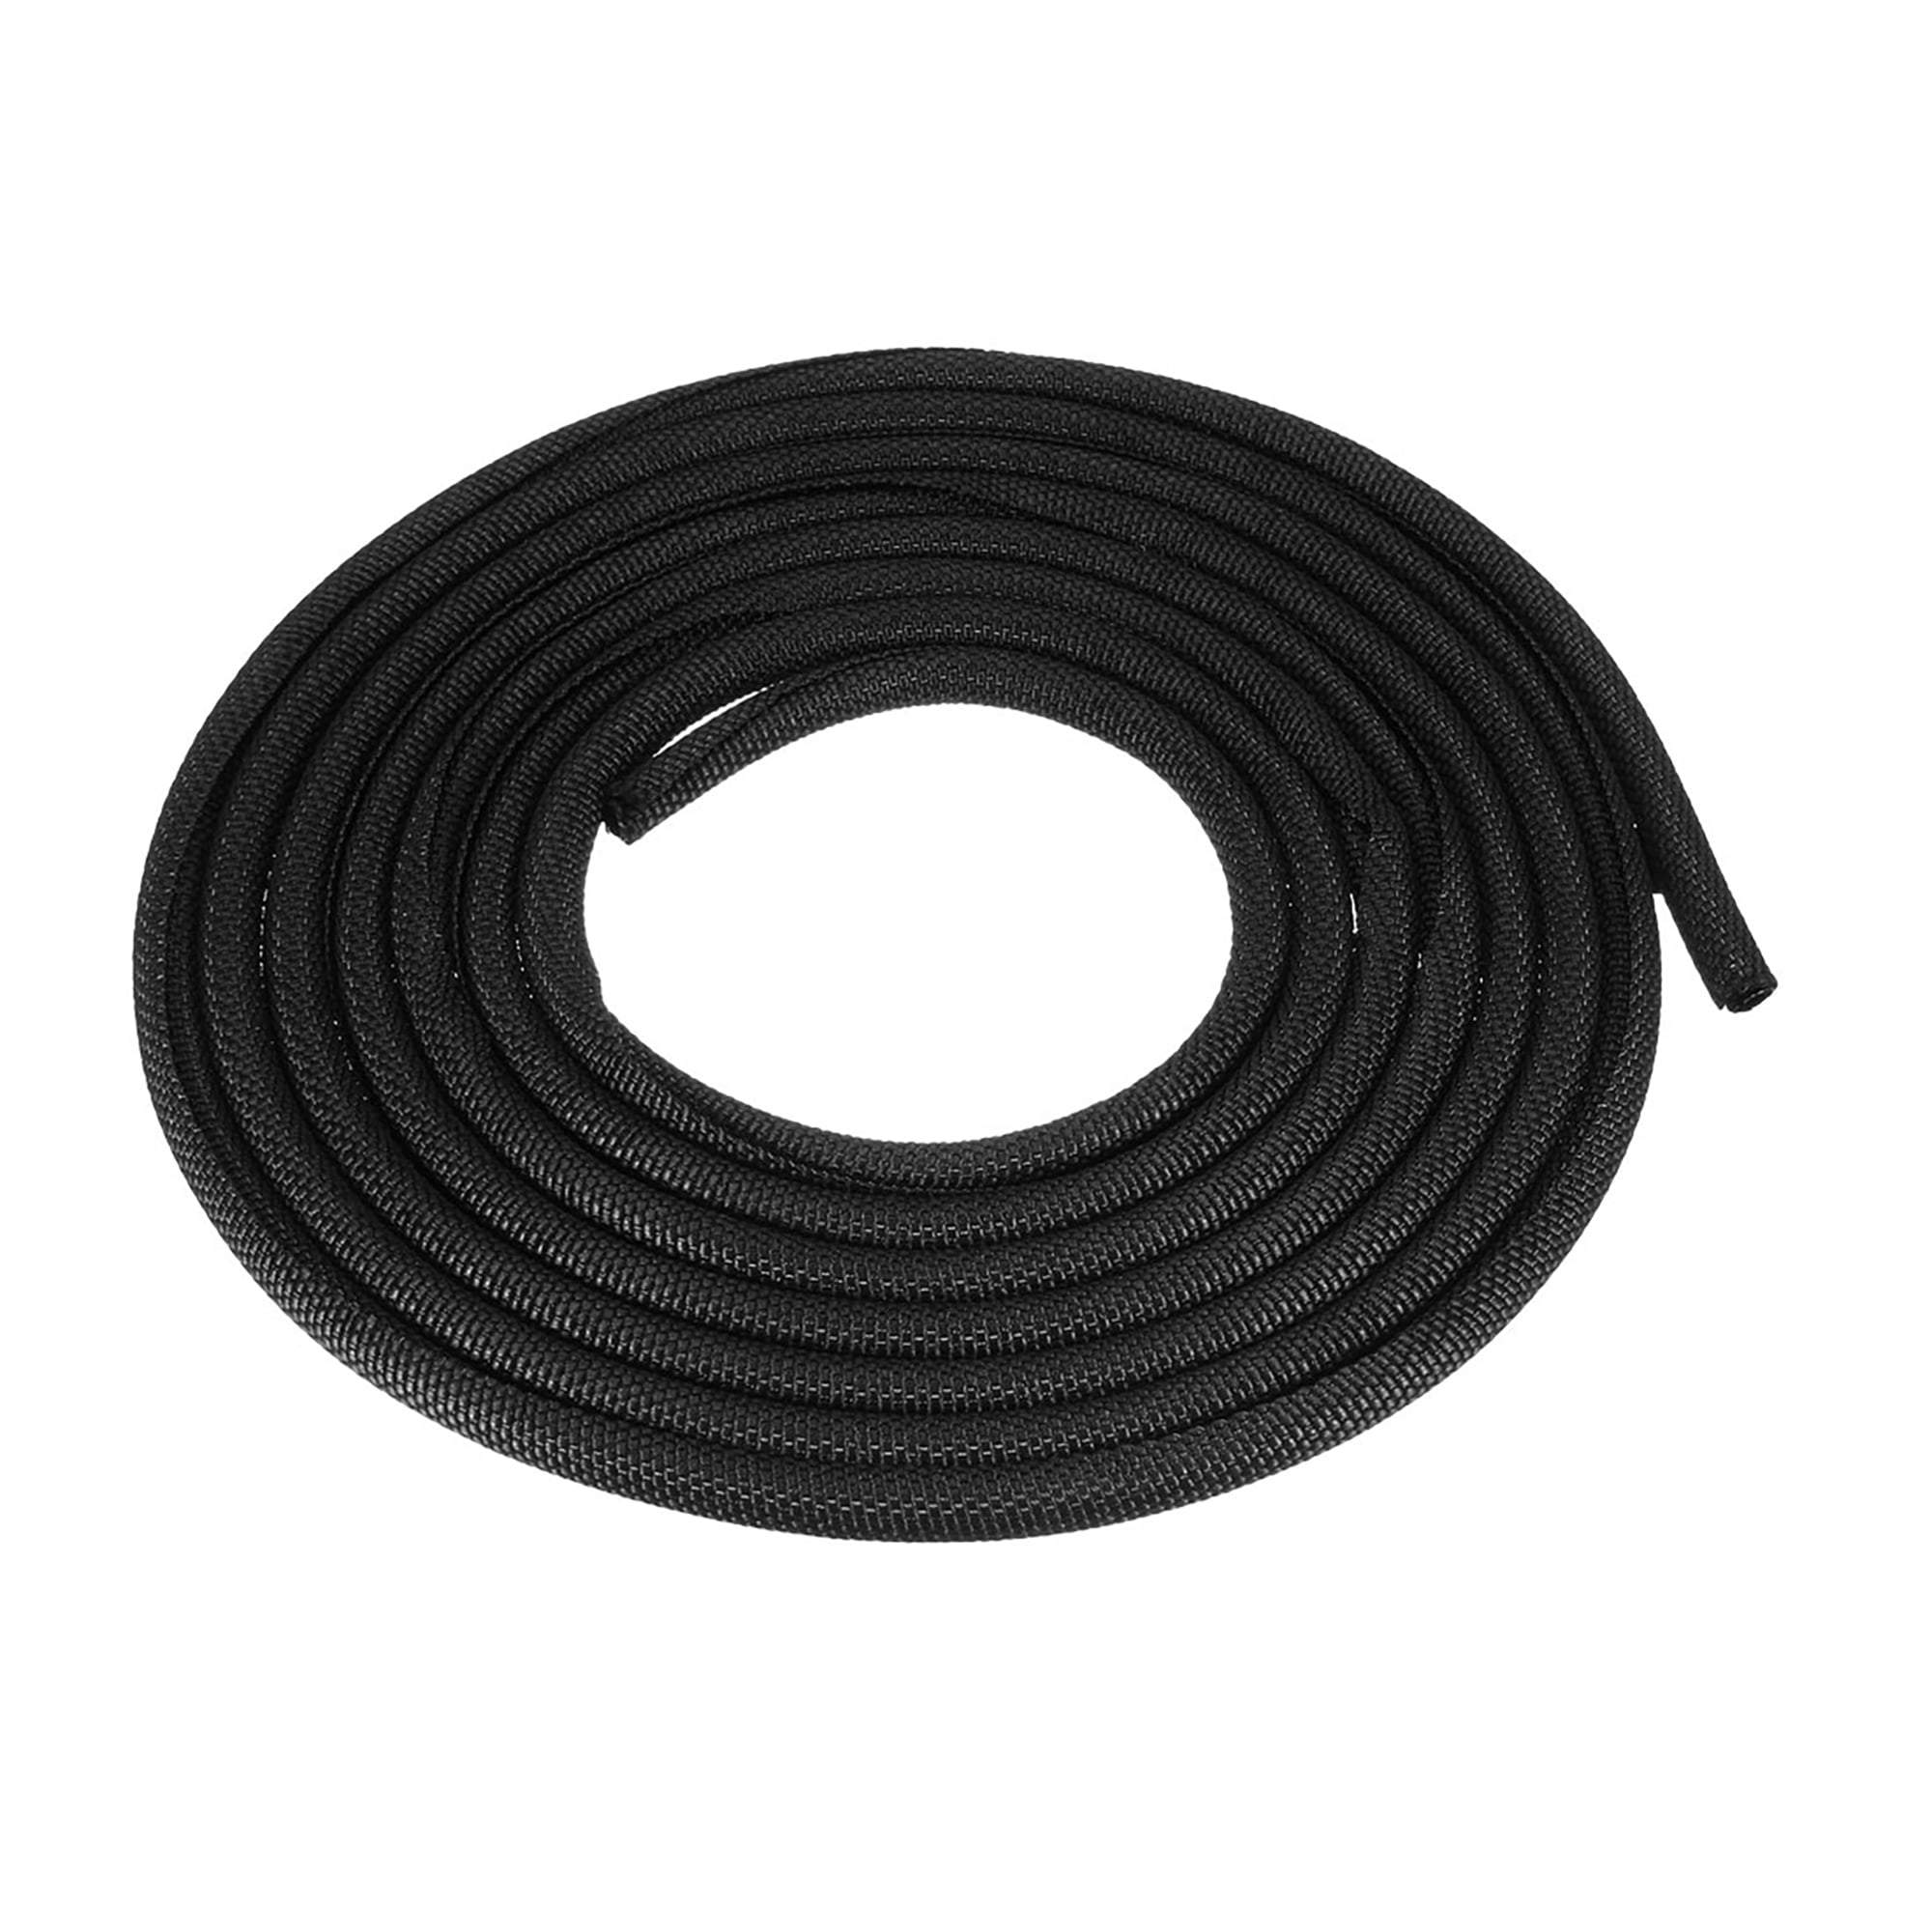 Cotton Tube Sheath Cover Cable Wire Sleeve Sleeving 4mm 6mm 8mm 